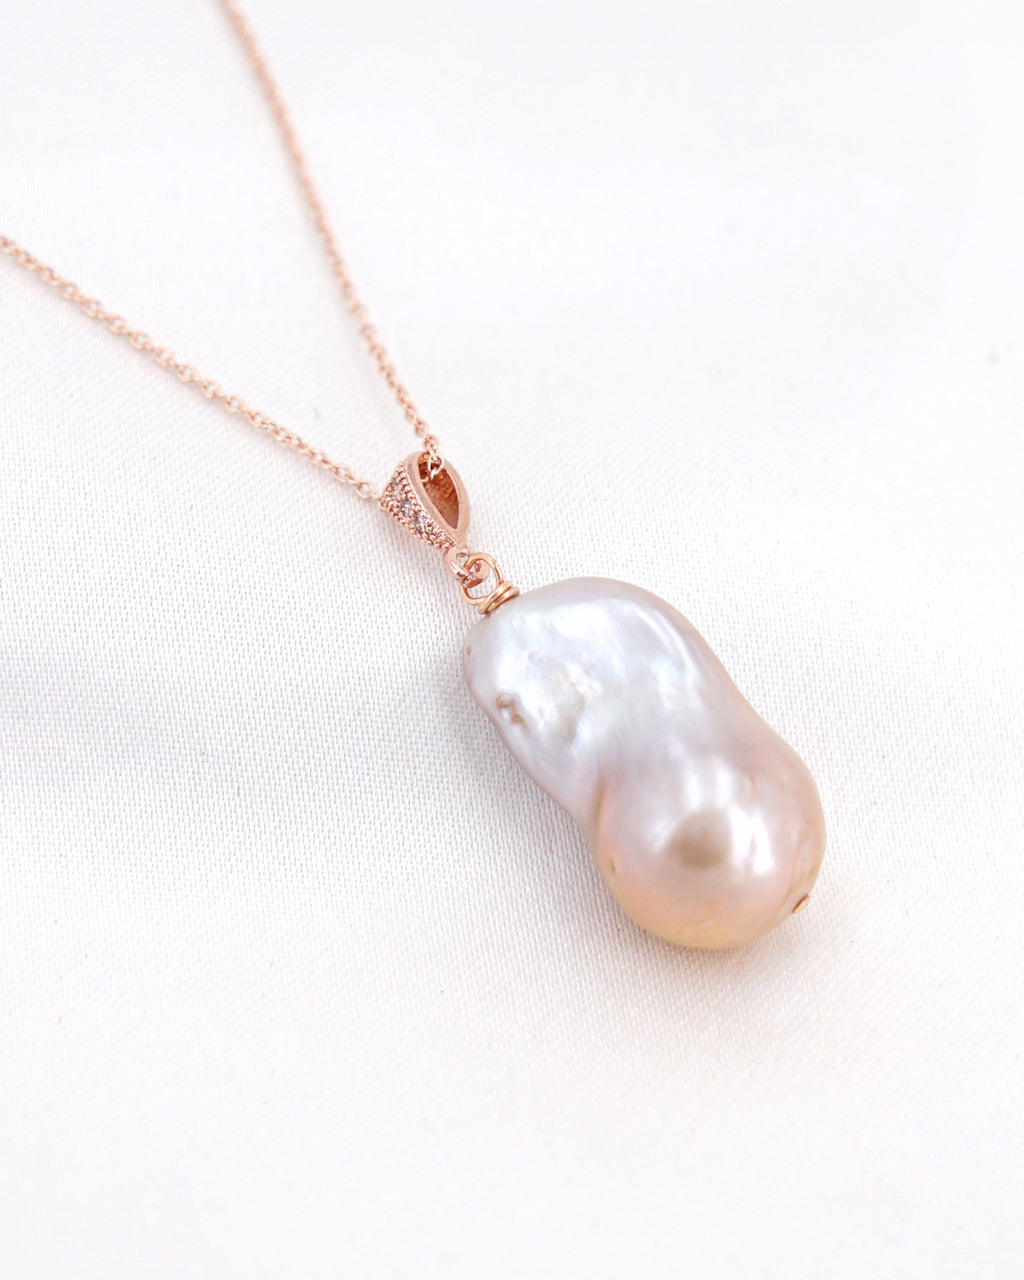 Baroque Pearl Pendant Necklace - Simple - Wedding Bridal Jewelry for Brides and Bridesmaids | Singapore